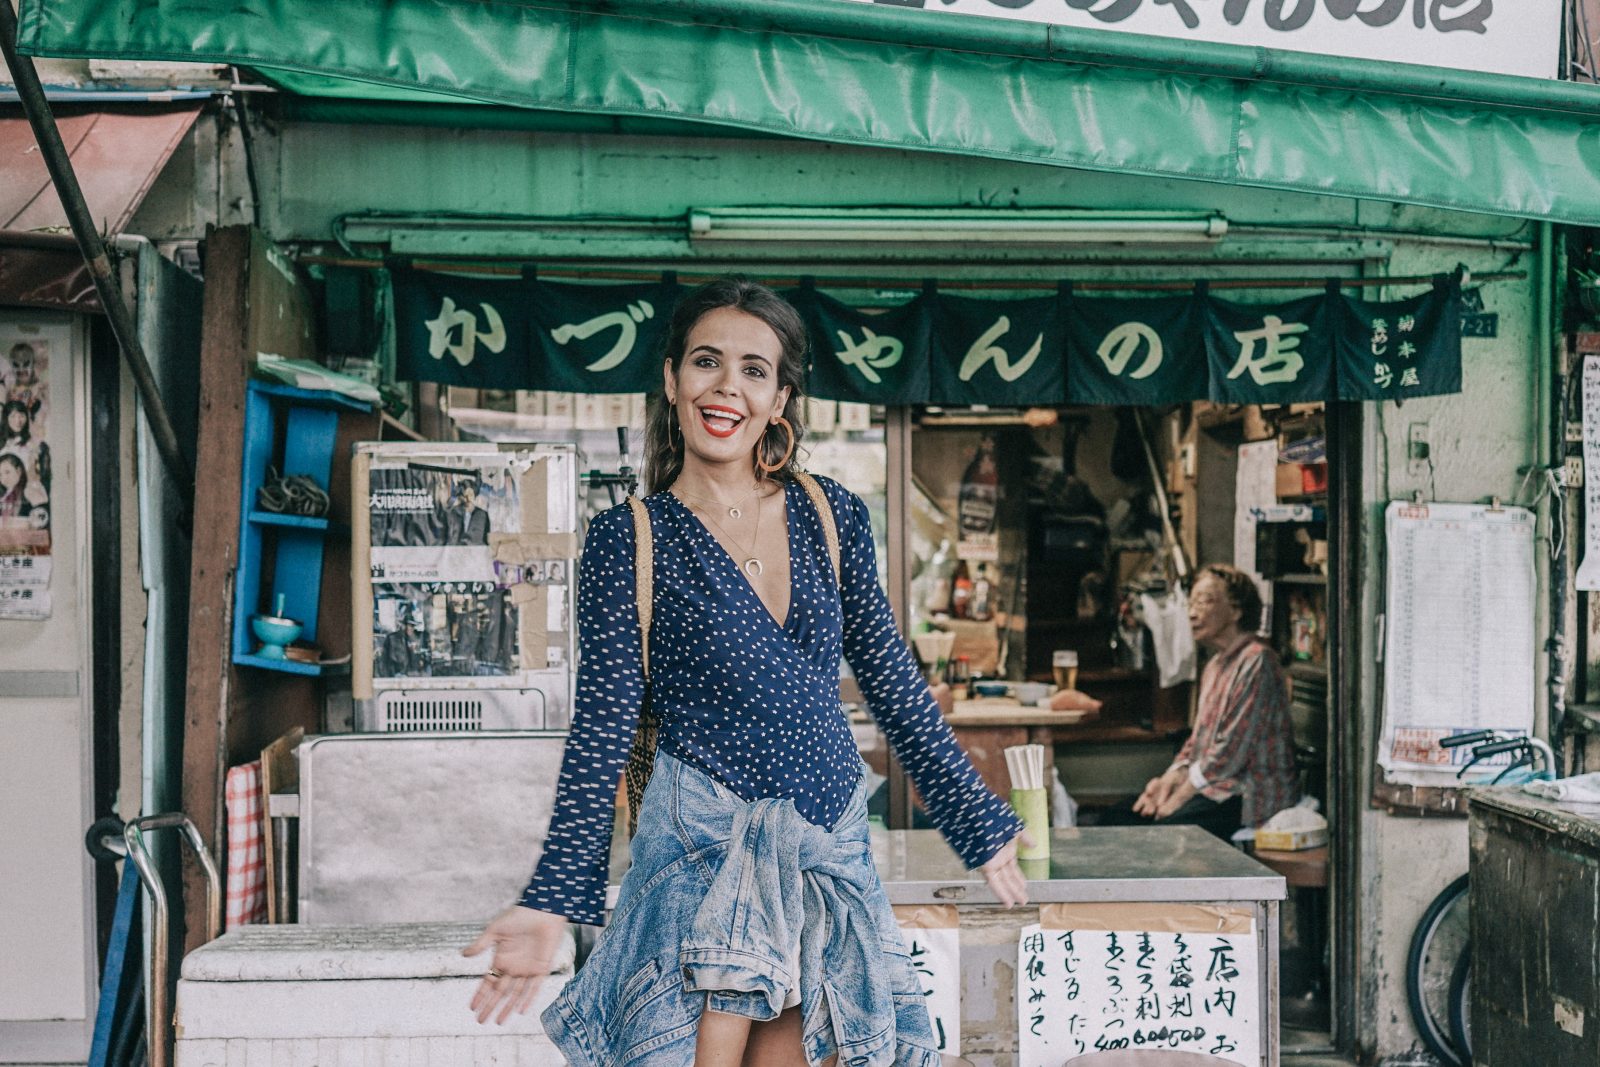 Tokyo_Travel_Guide-Outfit-Collage_Vintage-Street_Style-Reformation_Shorts-Realisation_Par_Stars_Blouse-Sneakers-Flea_Market_Backpack-93